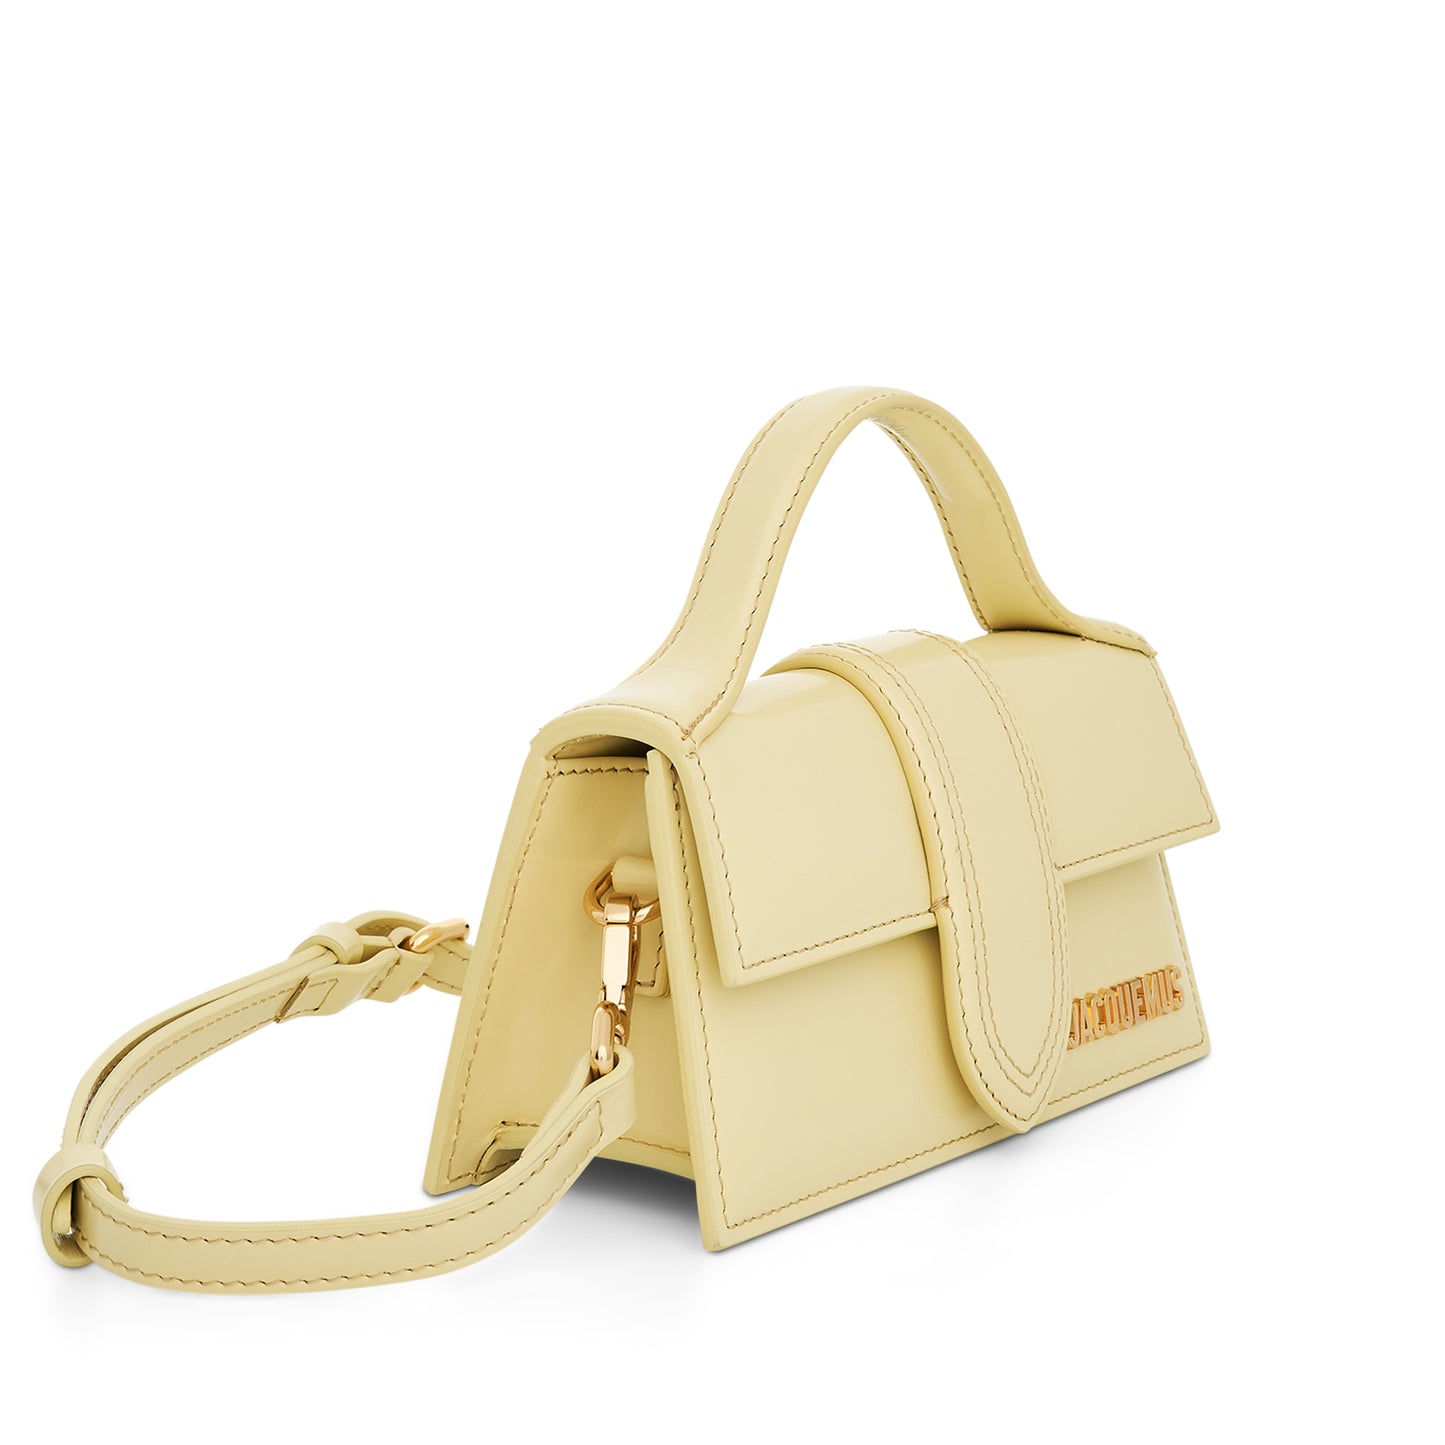 Le Bambino Leather Bag in Pale Yellow